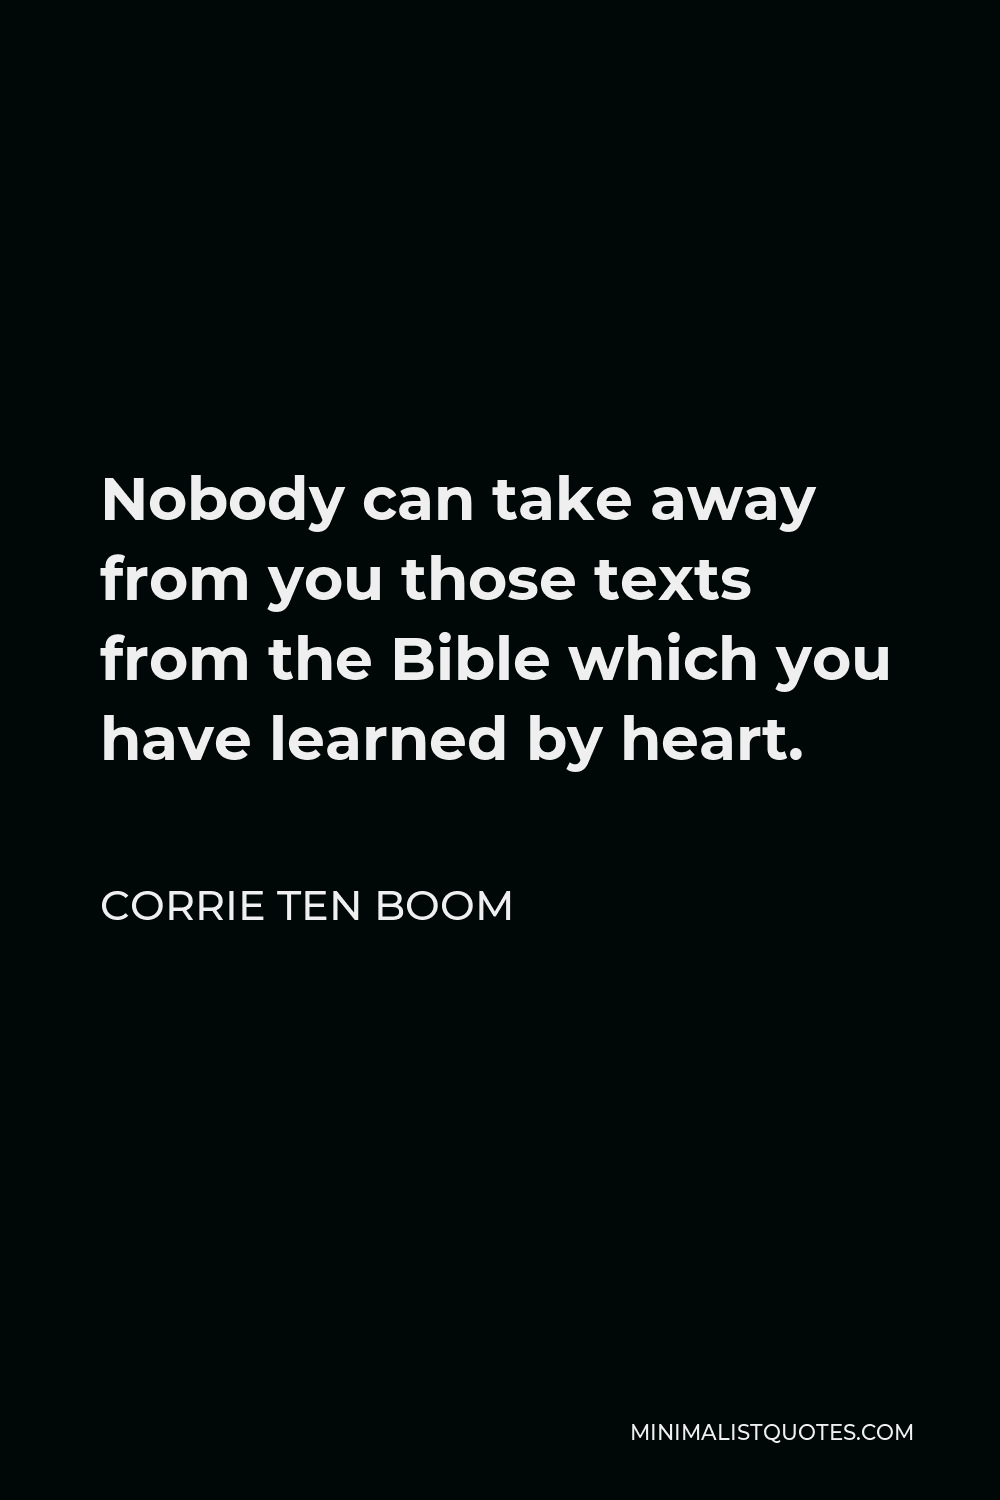 Corrie ten Boom Quote - Nobody can take away from you those texts from the Bible which you have learned by heart.